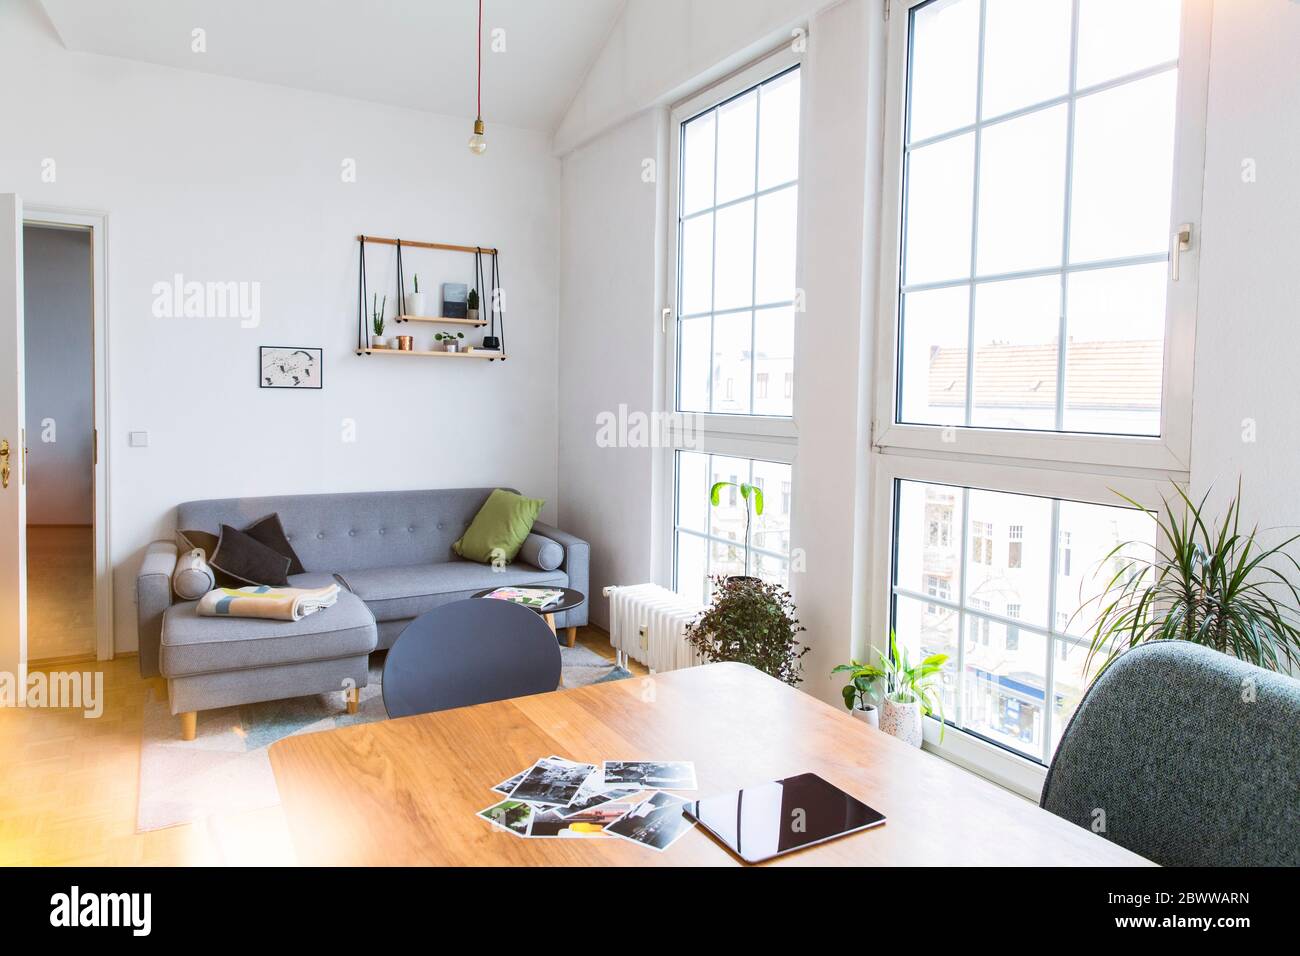 Photographs and tablet on table in bright living room with large windows Stock Photo